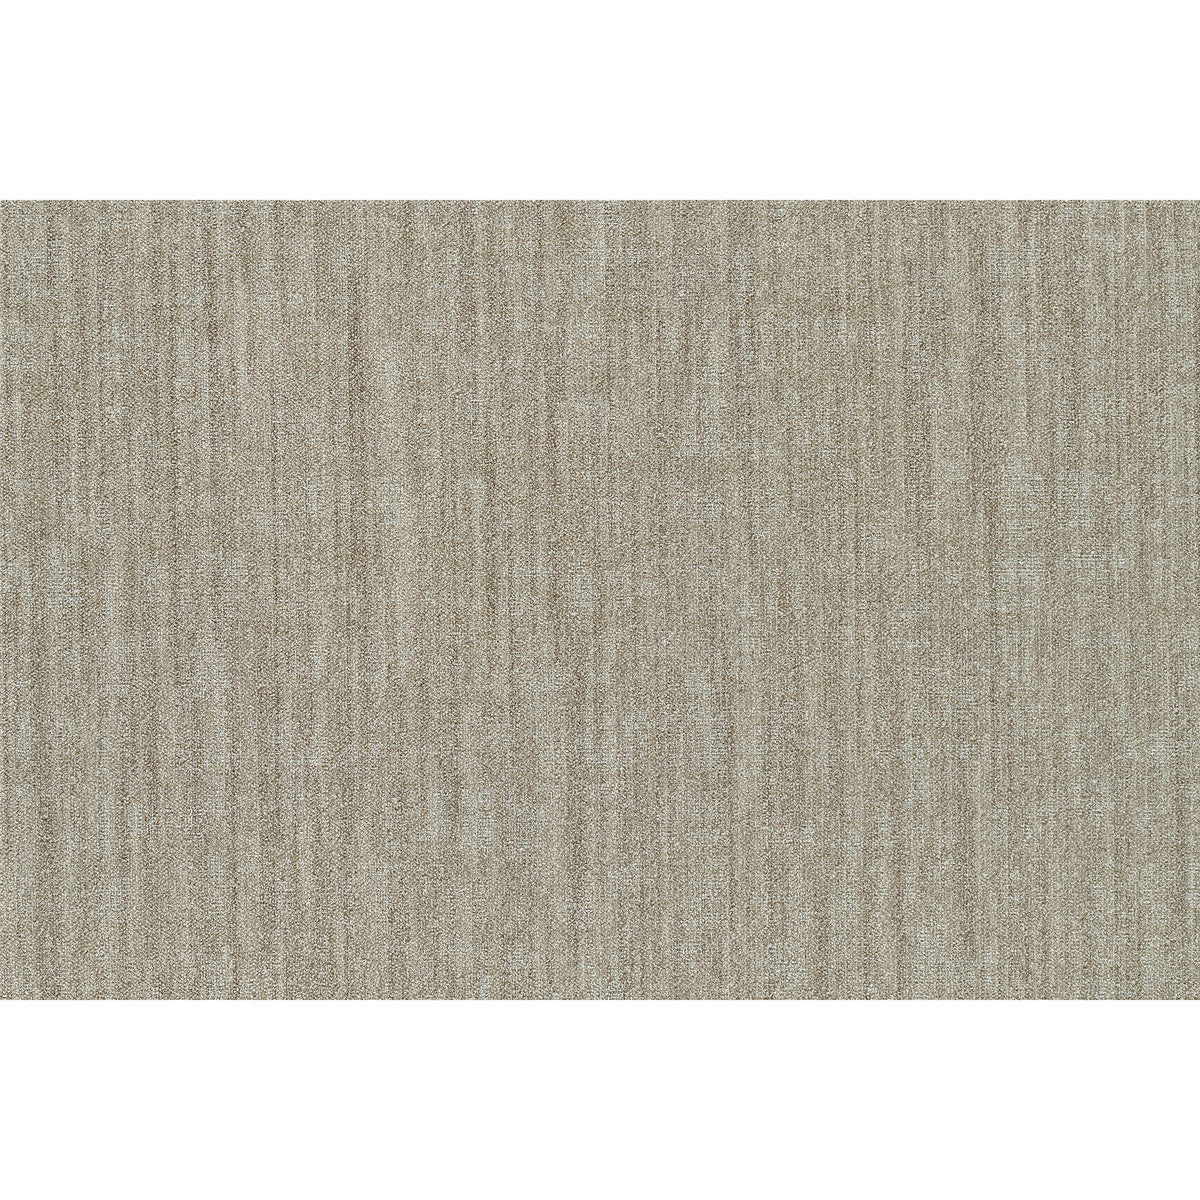 Shaw Contract - Modern Edit - Edition - Carpet Tile - Ivory